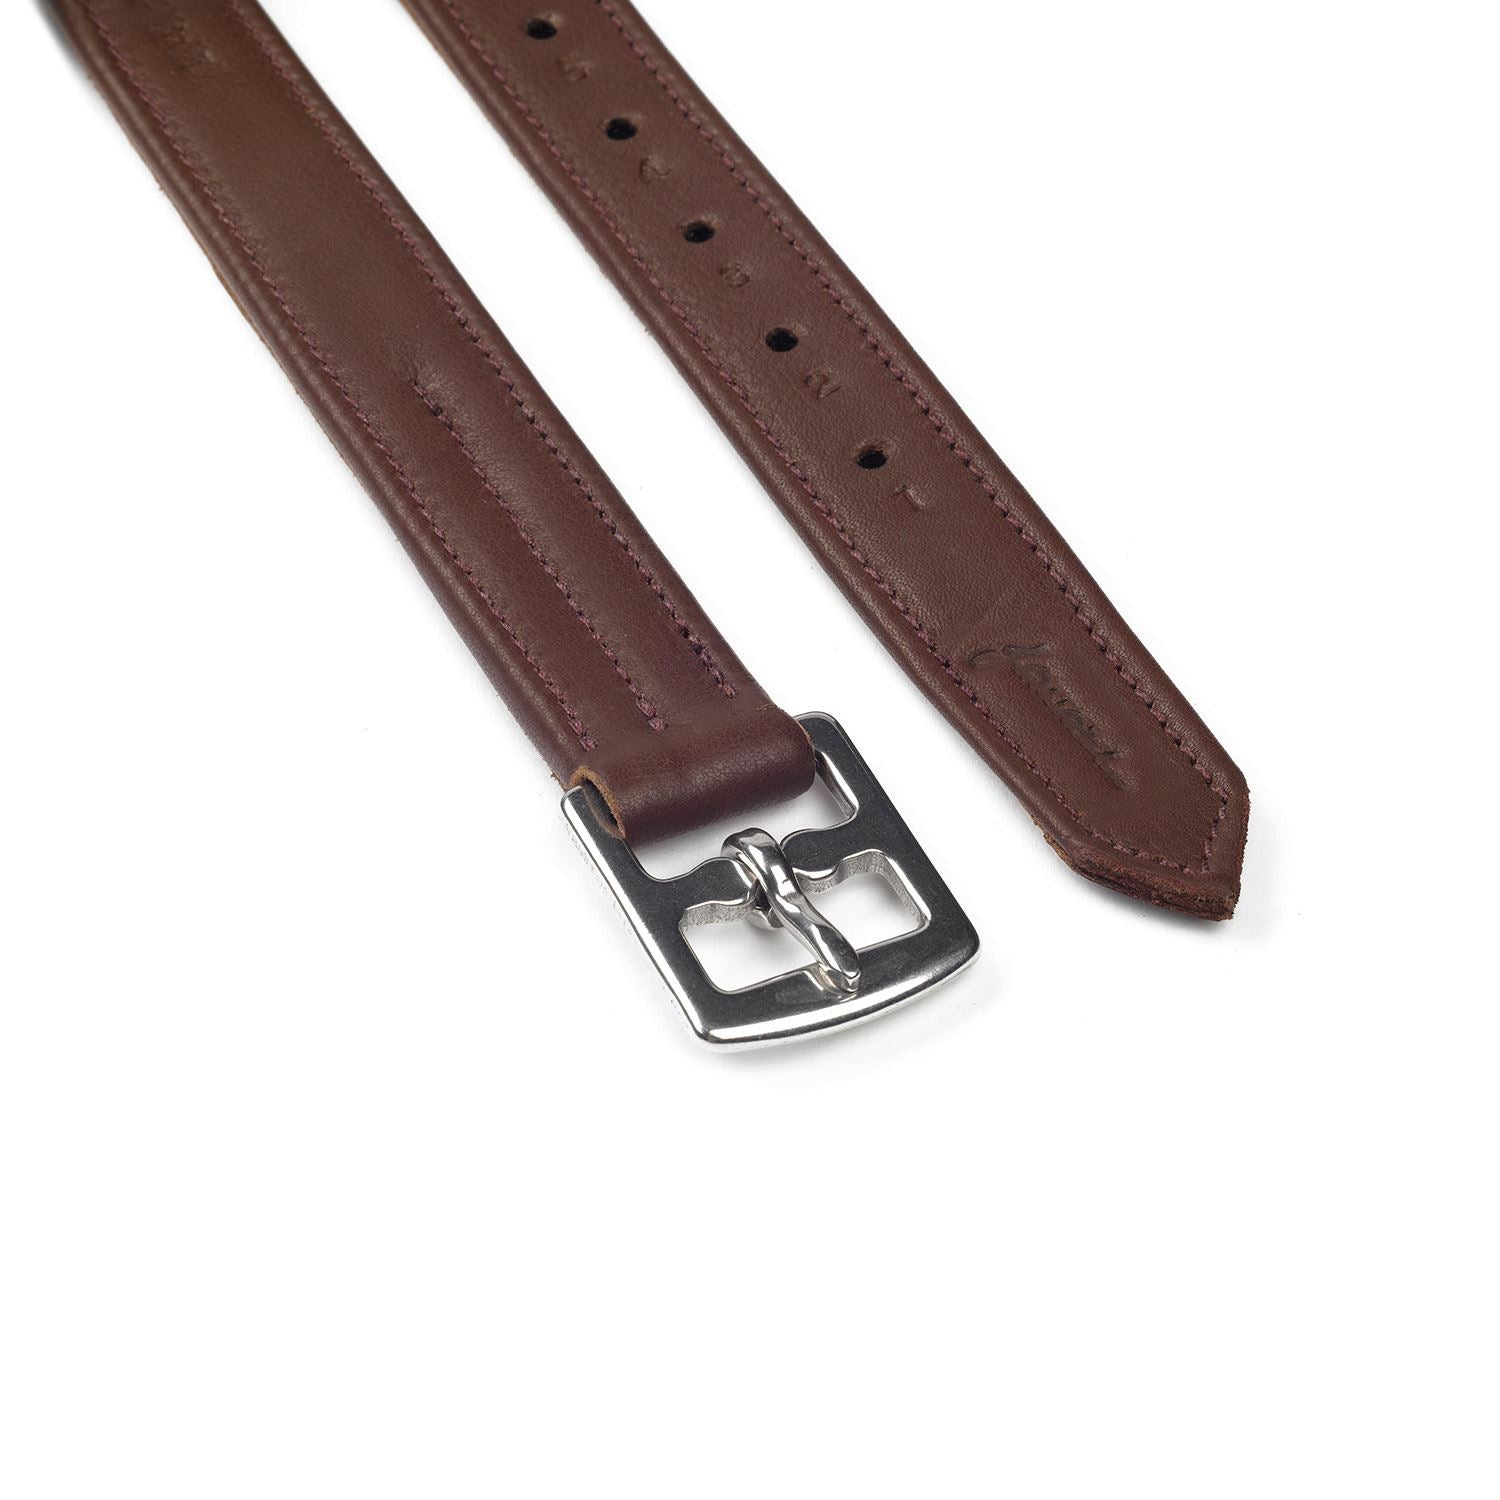 Whitaker Stirrup Leathers - Just Horse Riders